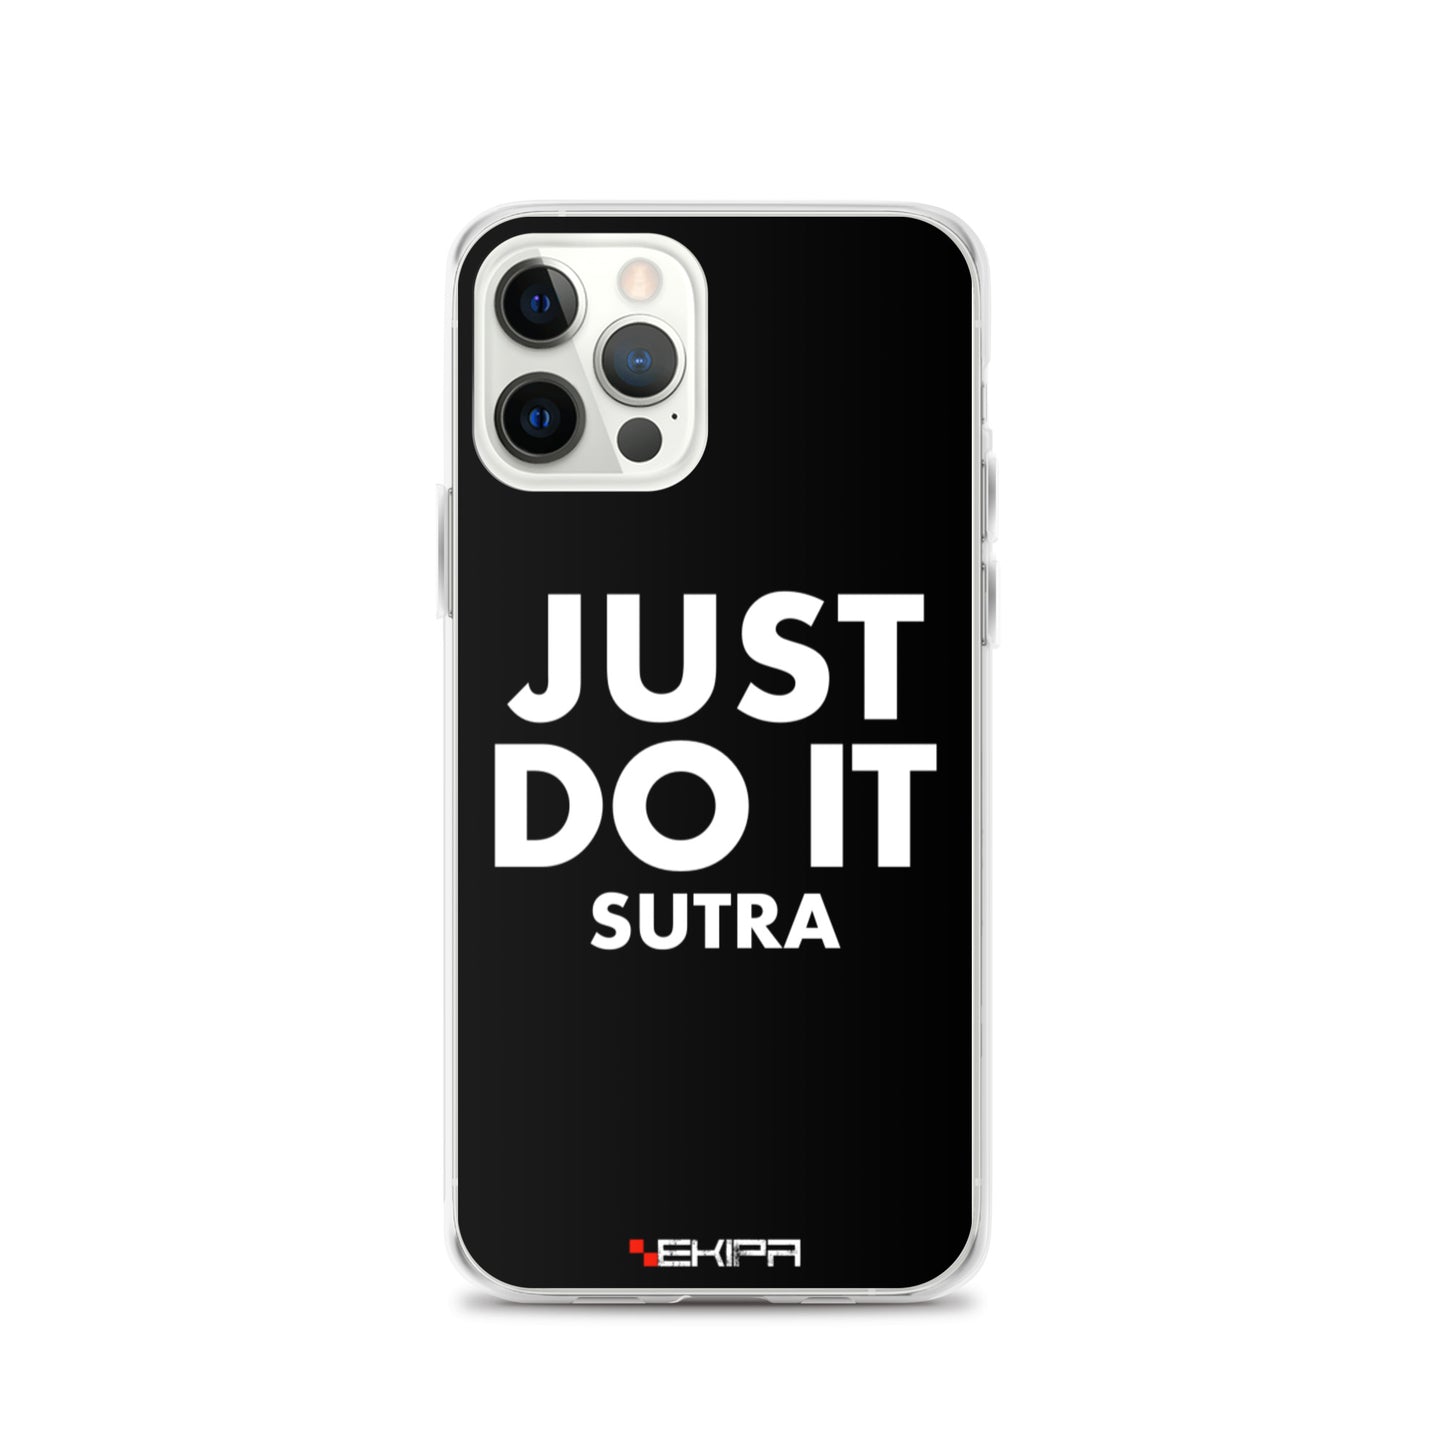 "Just do it sutra" - iPhone Hülle